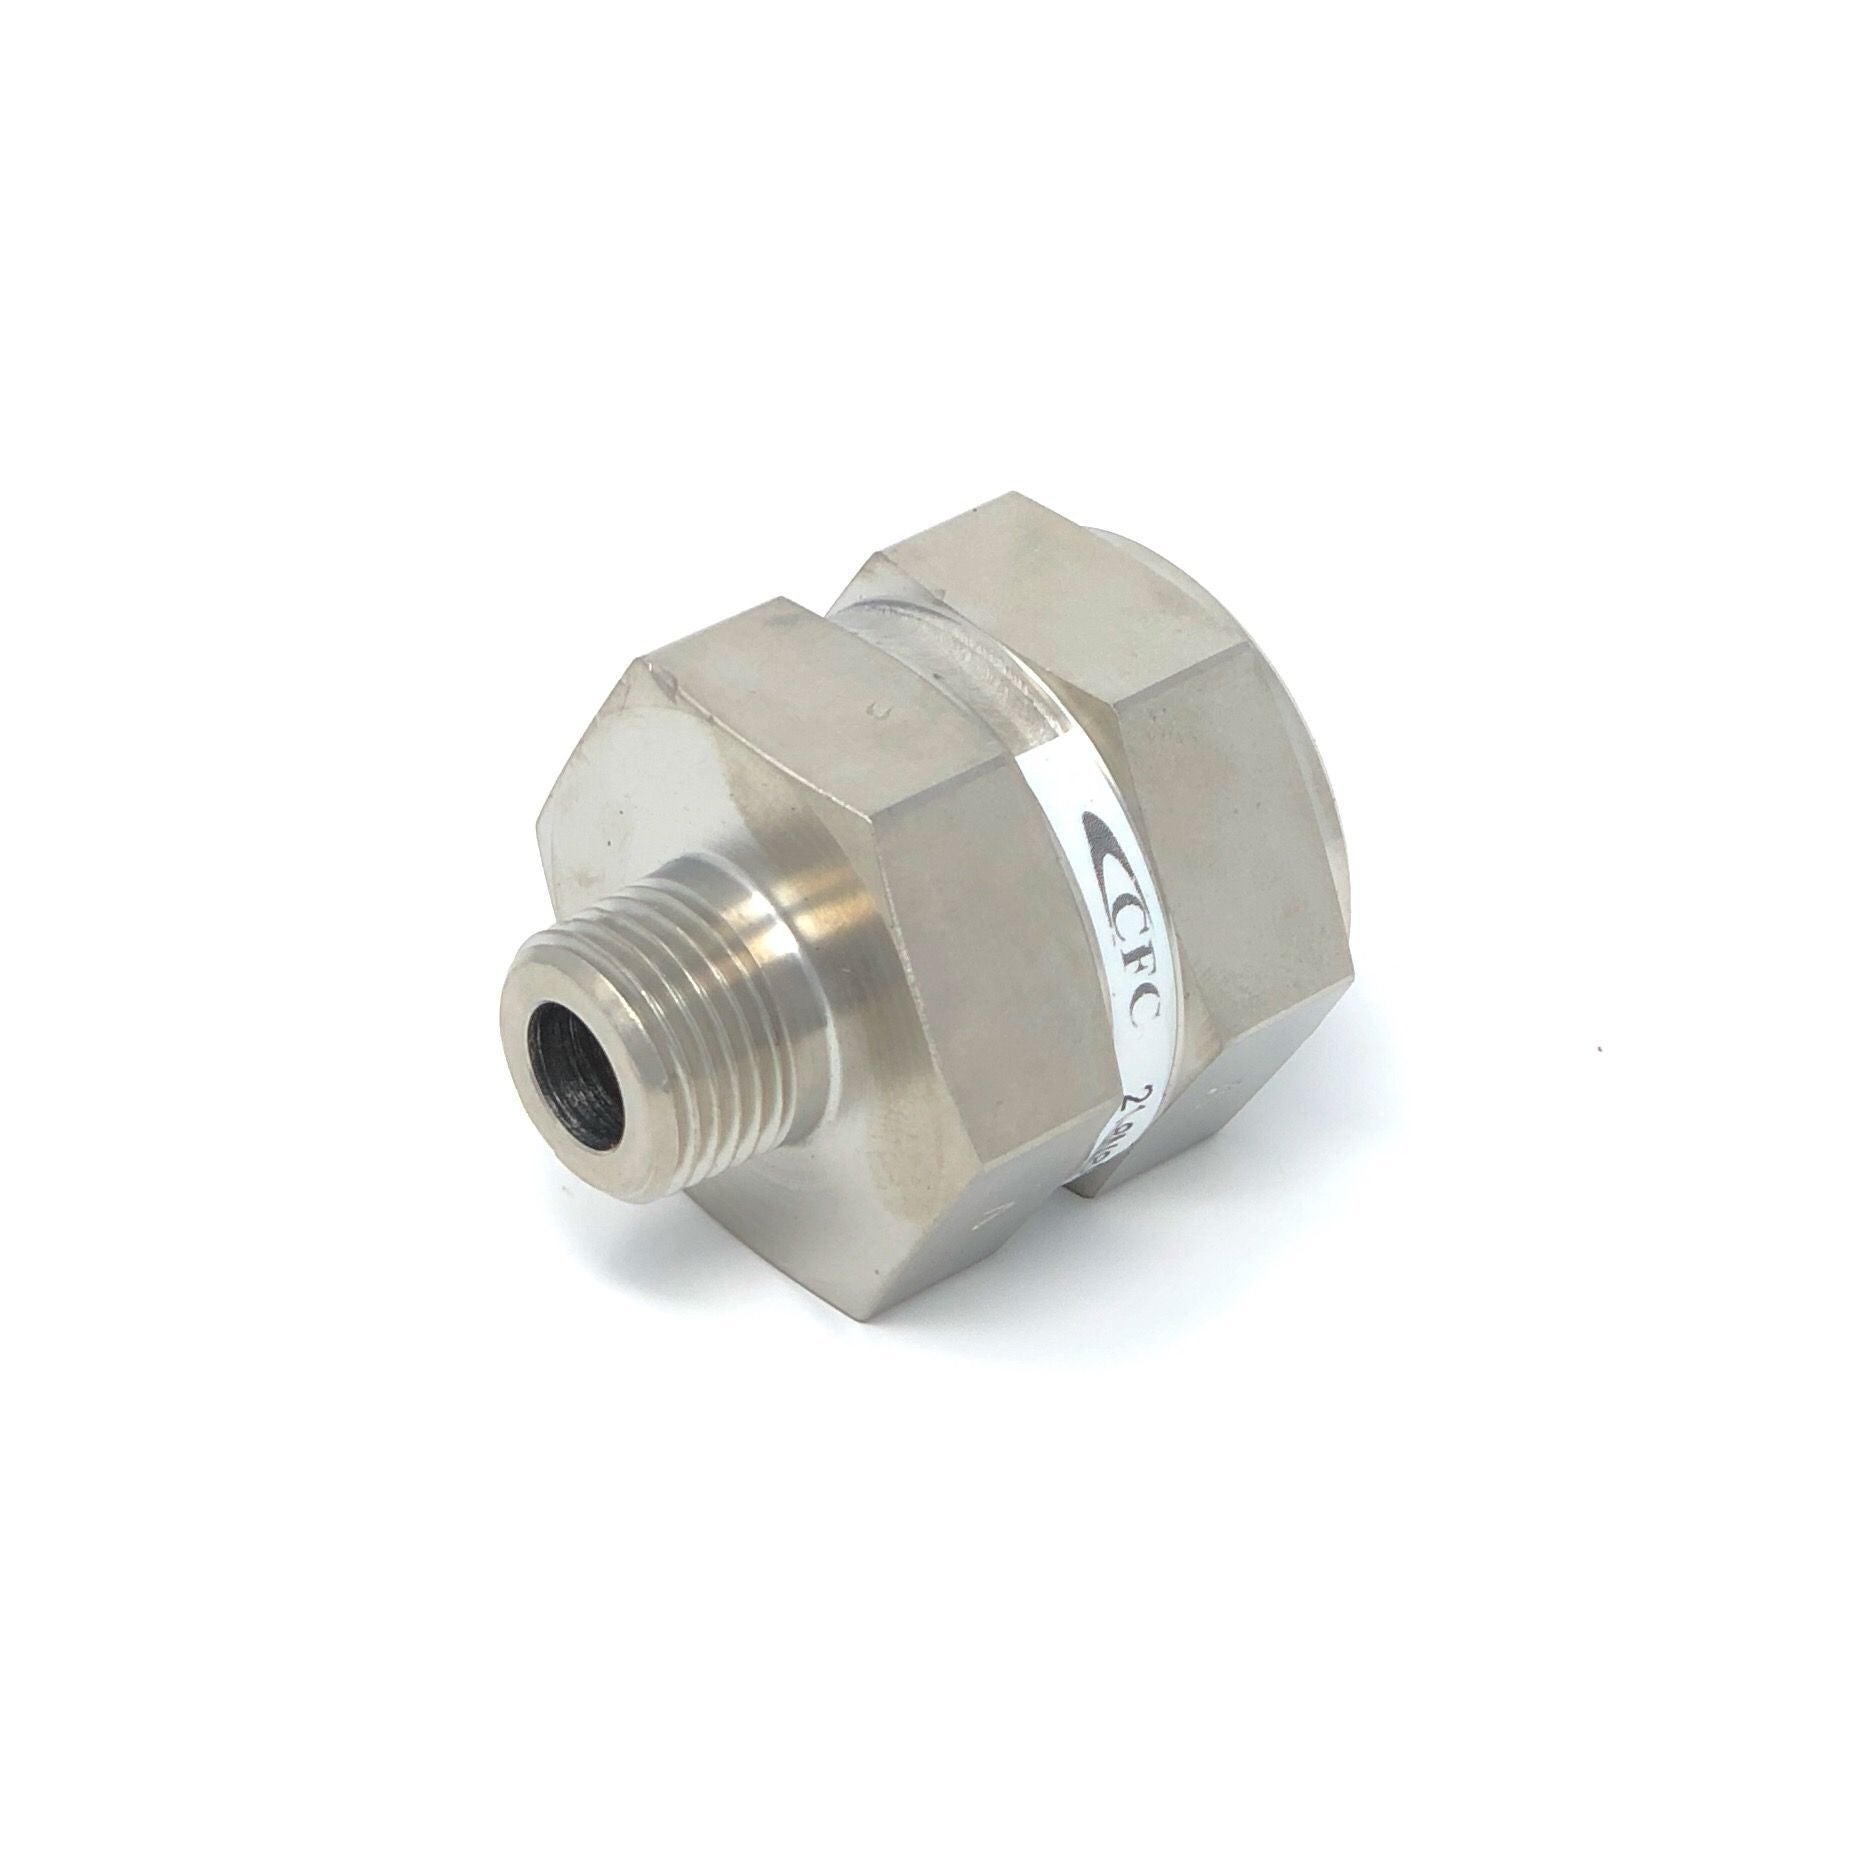 21-4T4T-18S : Chase High Pressure Inline Filter, 6000psi, 1/4" 37 Degree Flare, 18 Micron, No Visual Indicator, No Bypass